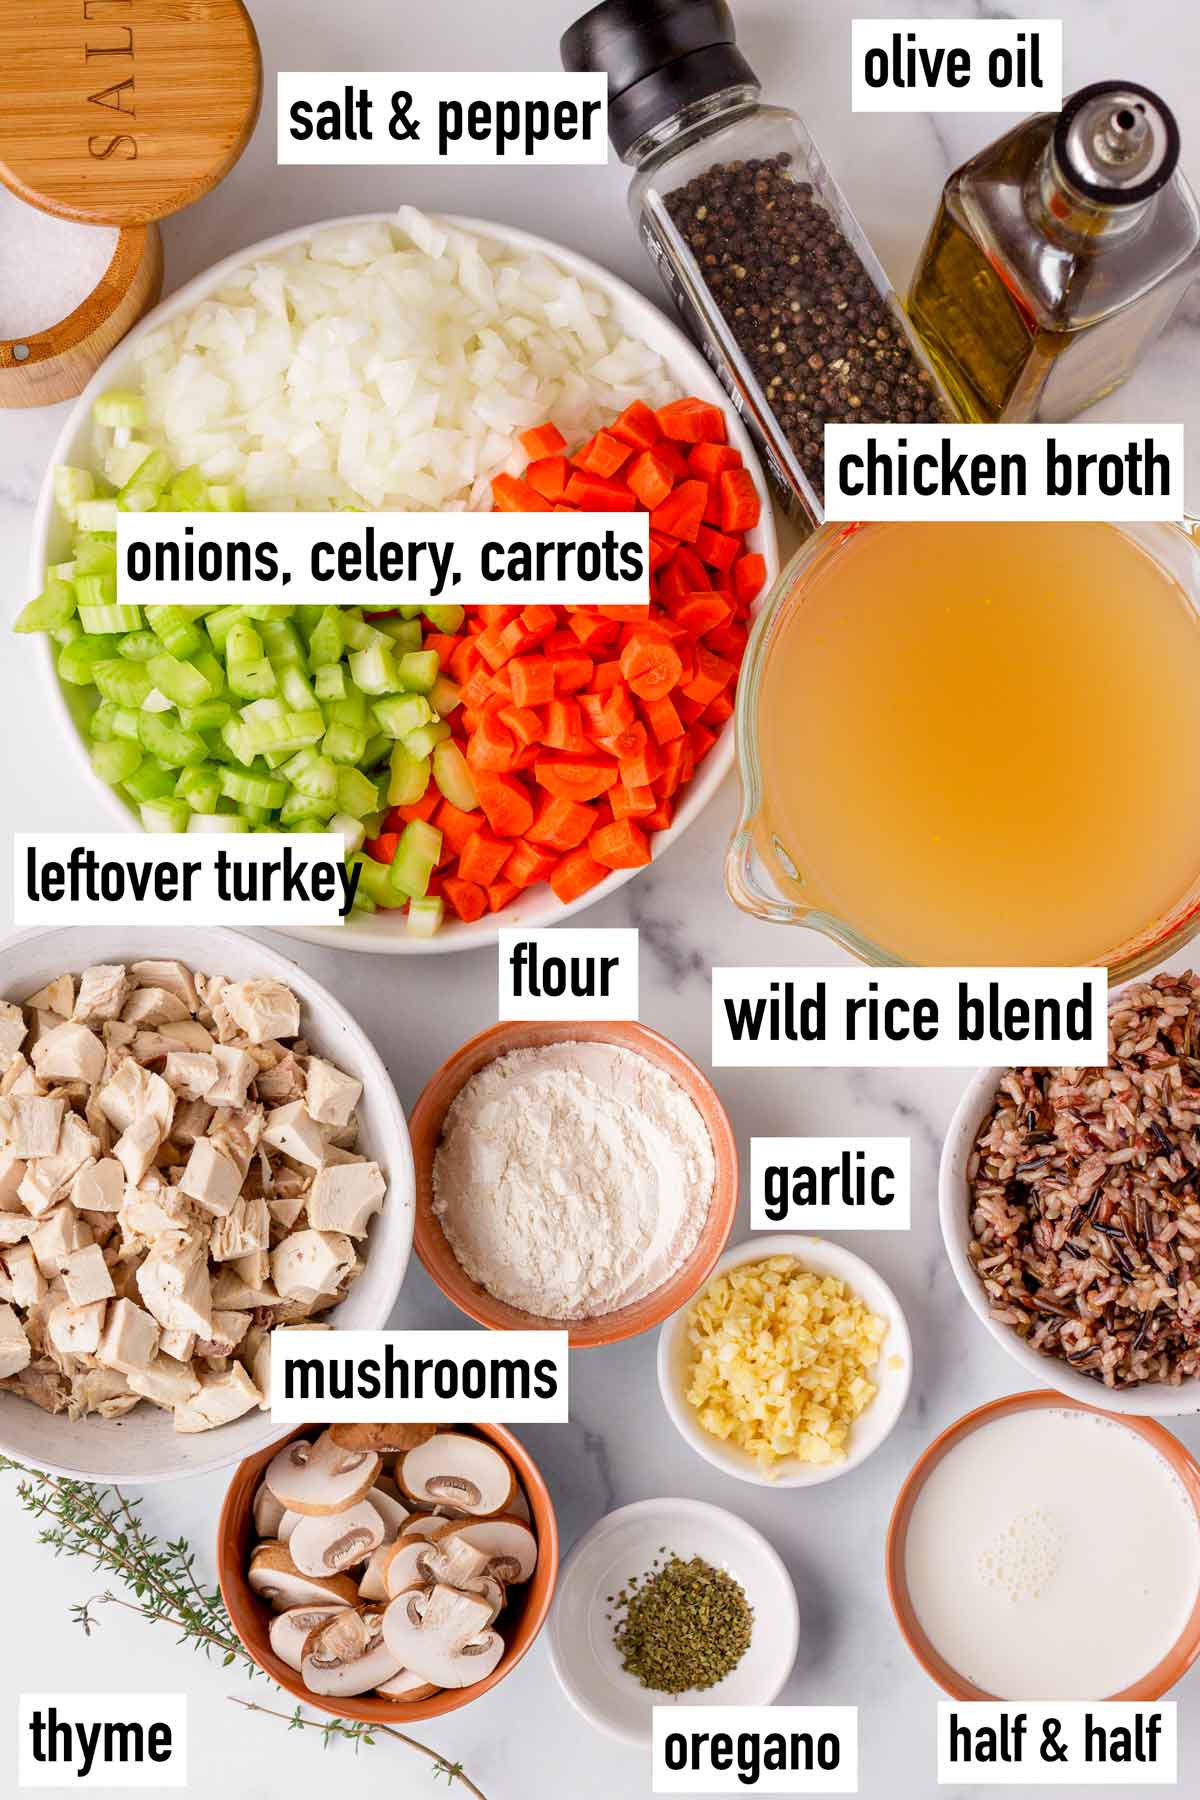 labeled ingredients